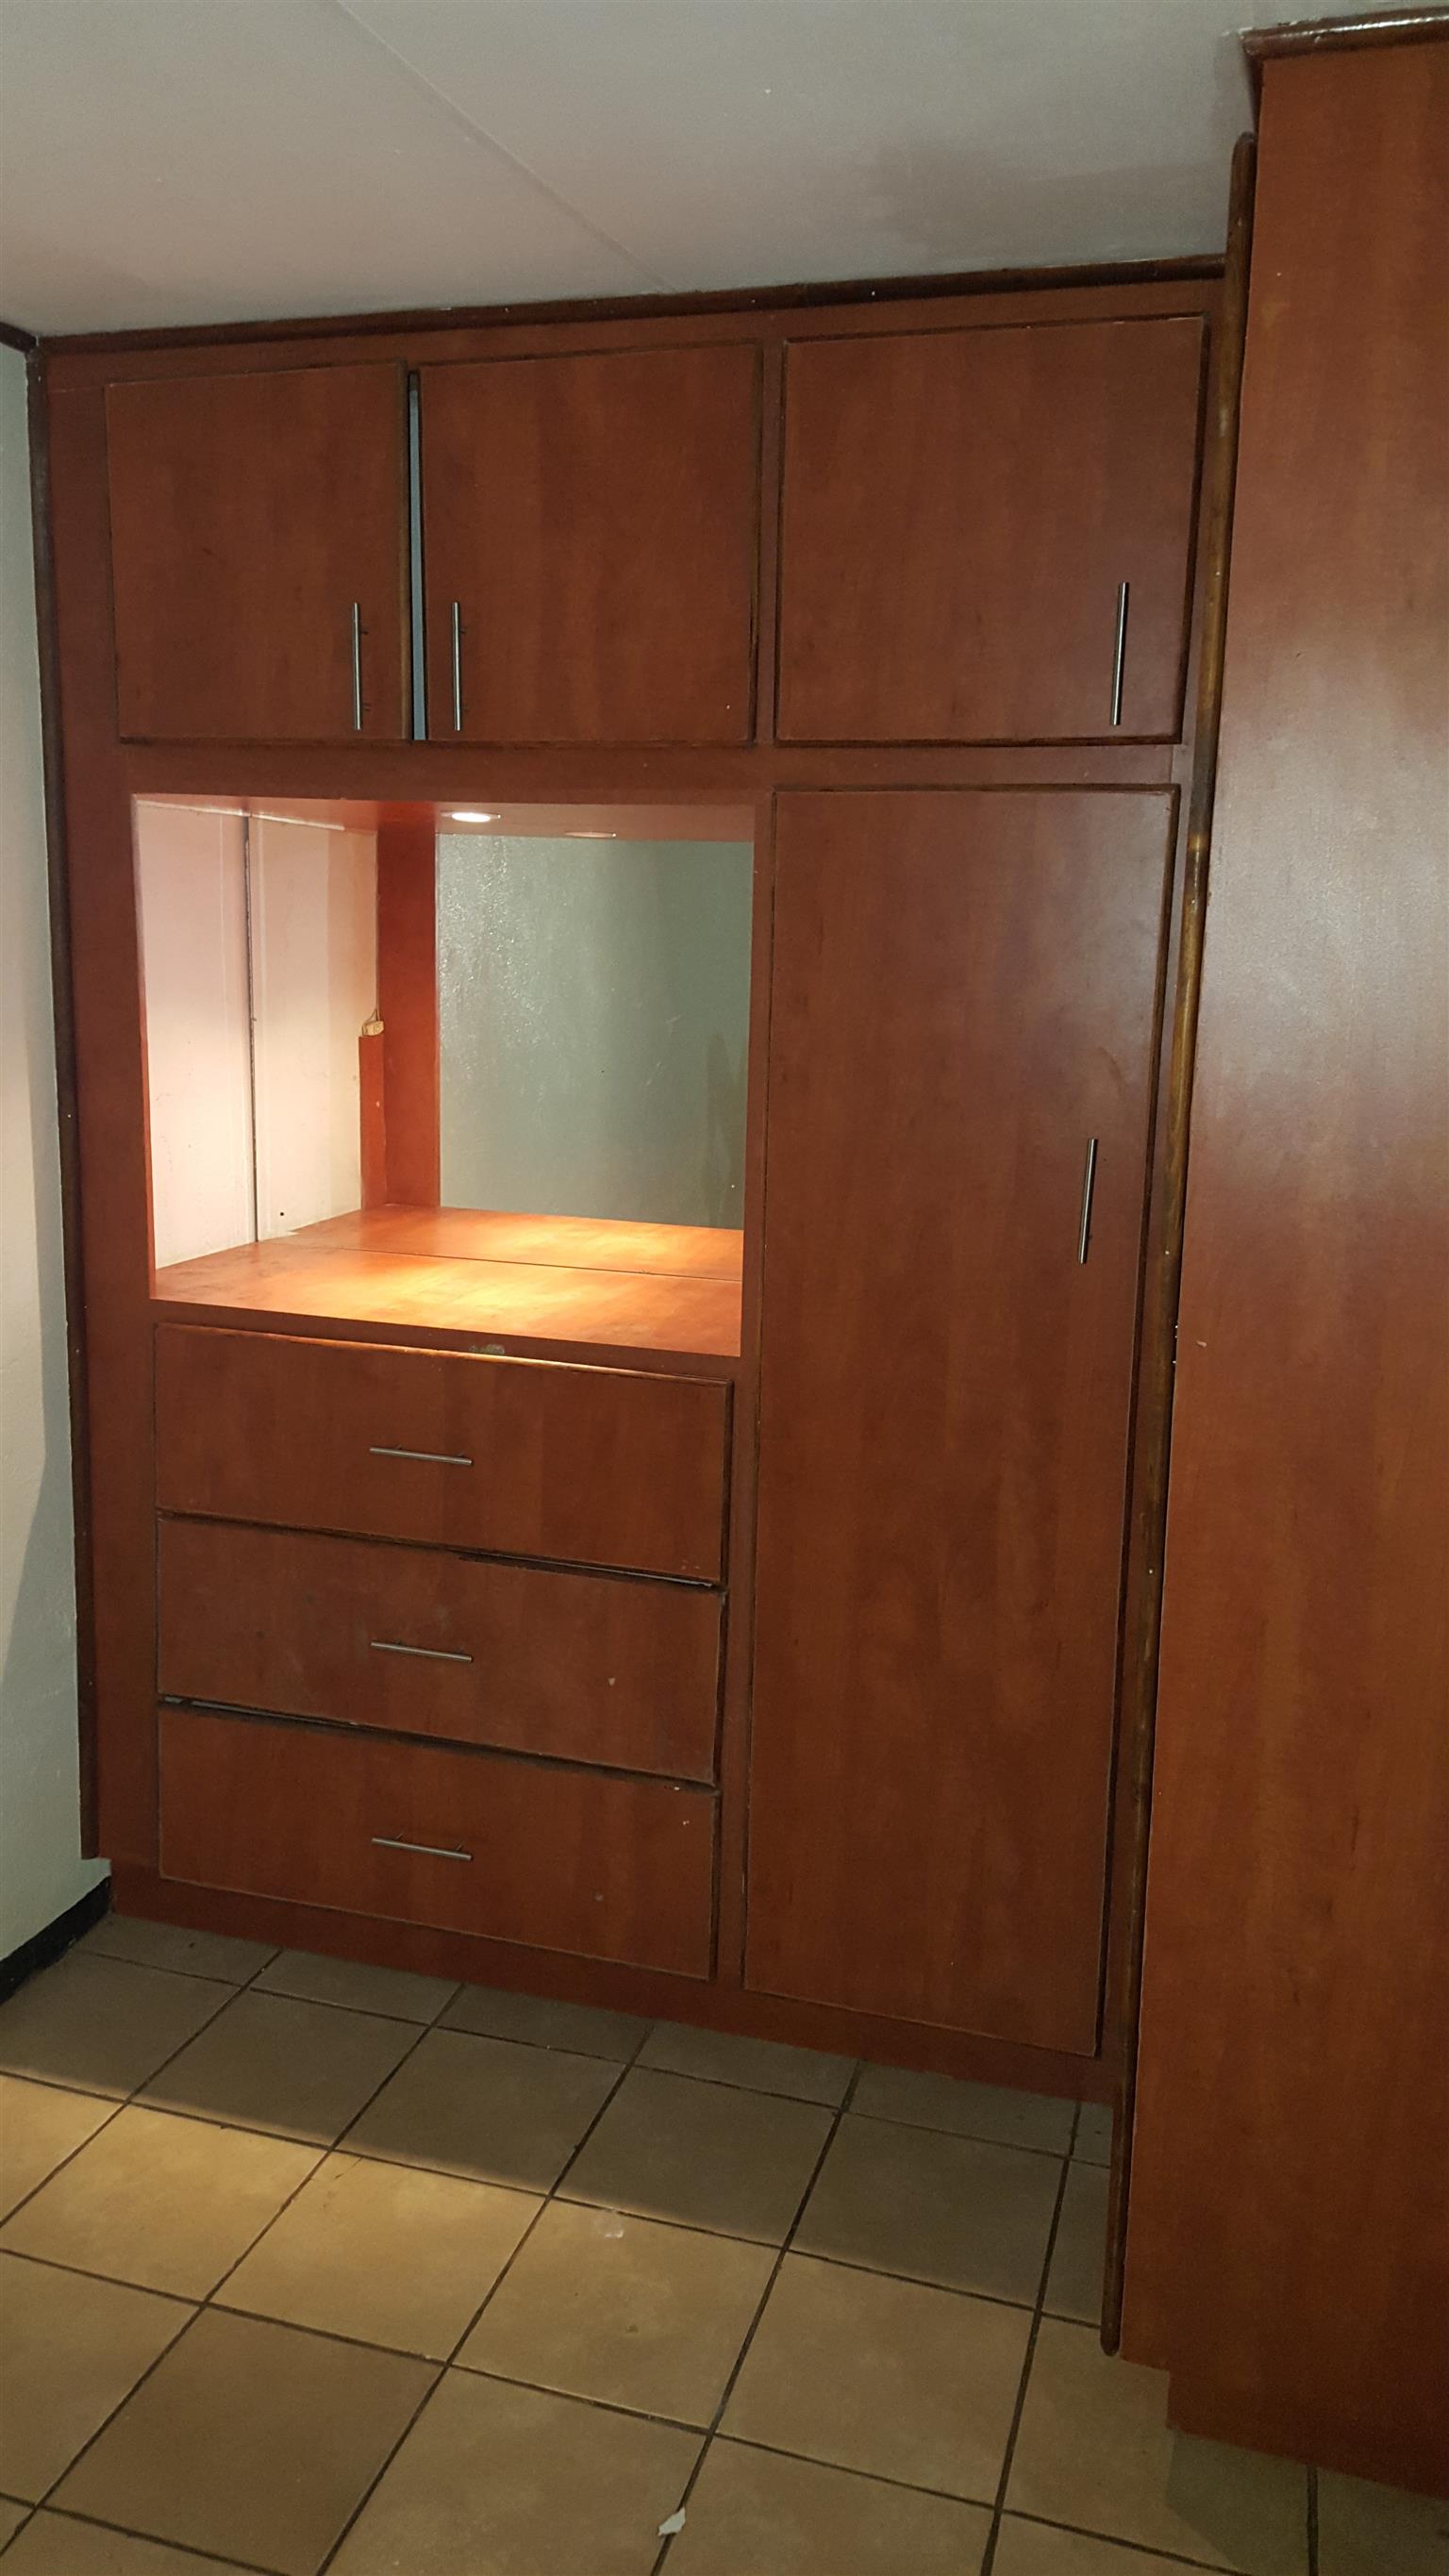 Bachelor apartment to rent in Pretoria west, Kwaggasrand